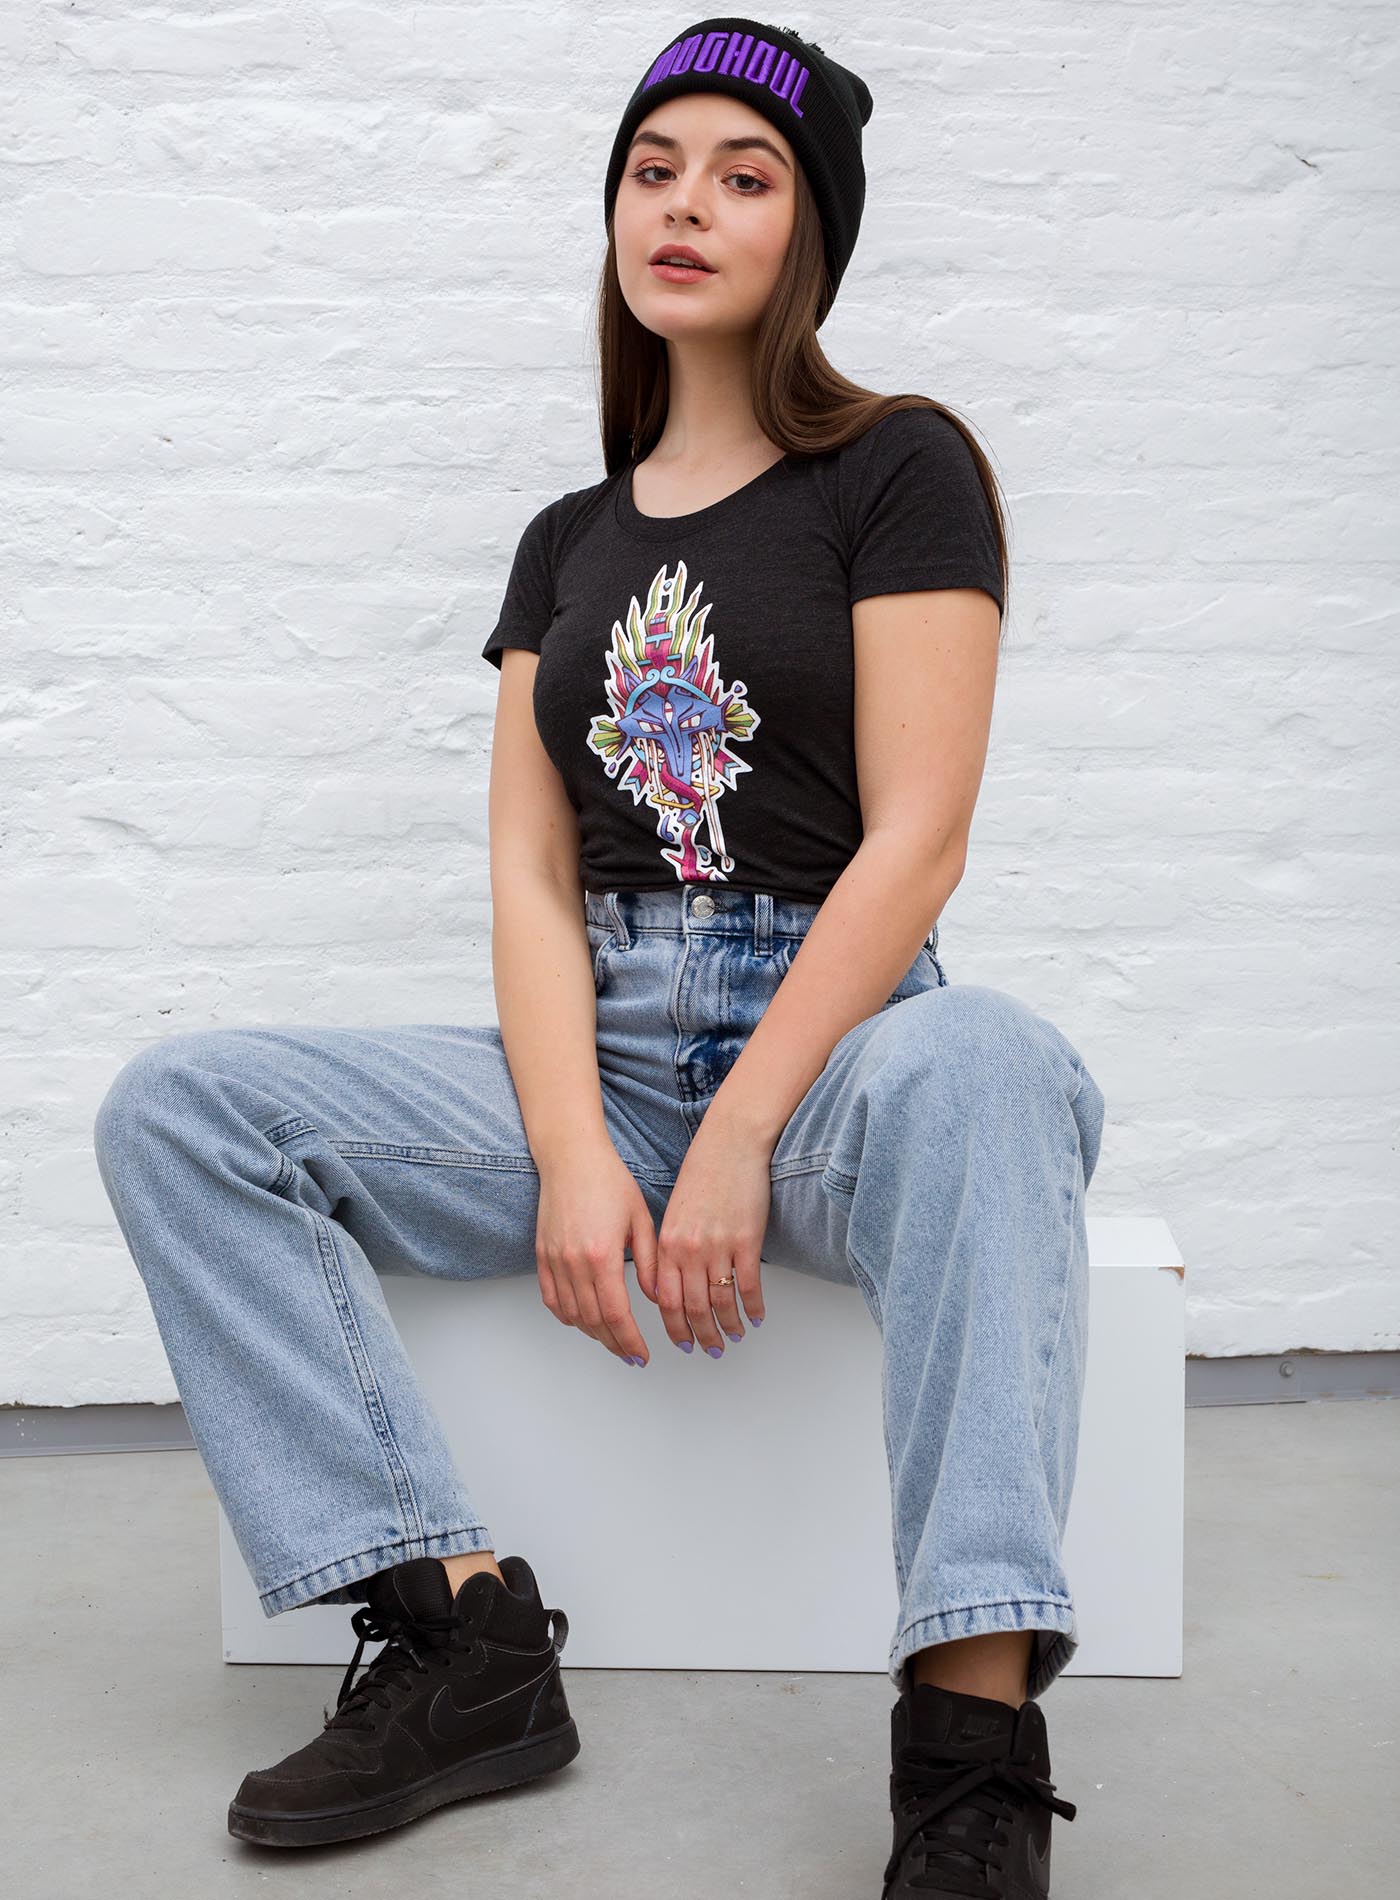 Woman modeling a Heather black woman's t-shirt featuring a front print of the Toltec and Aztec coyote deity illustrated by G.M. Meave.